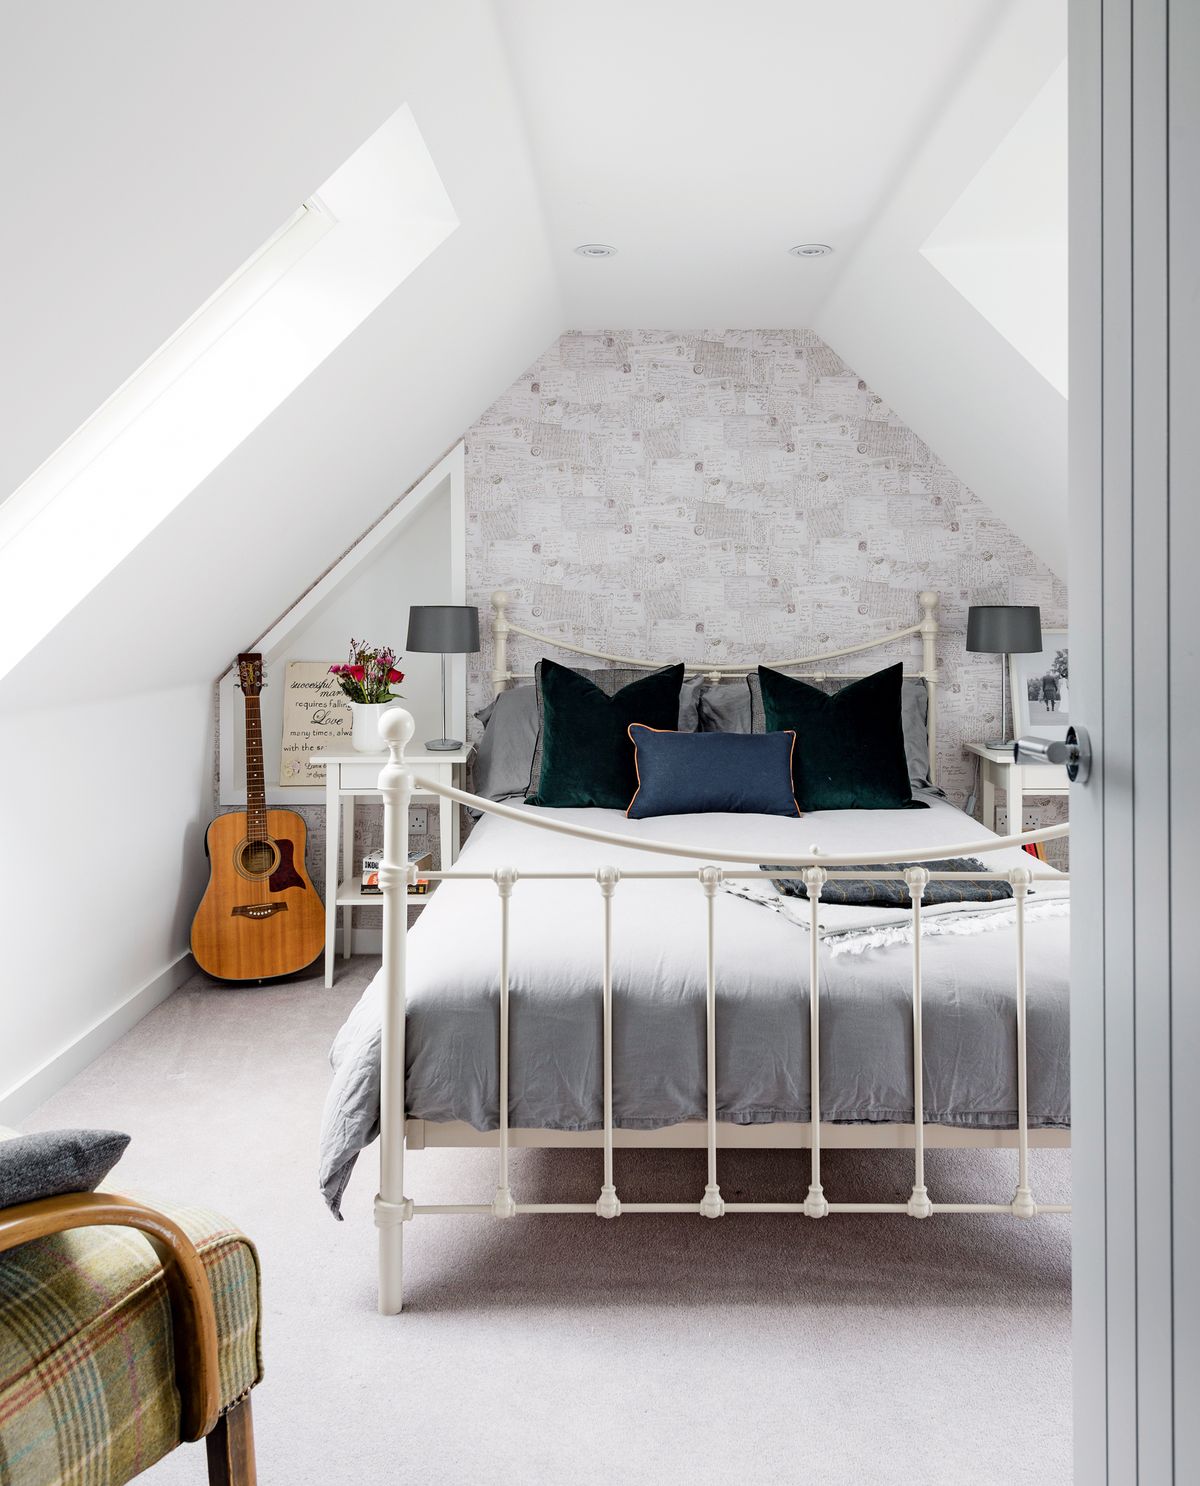 Loft Conversion Ideas And Tips 28 Ways To Extend Your Space